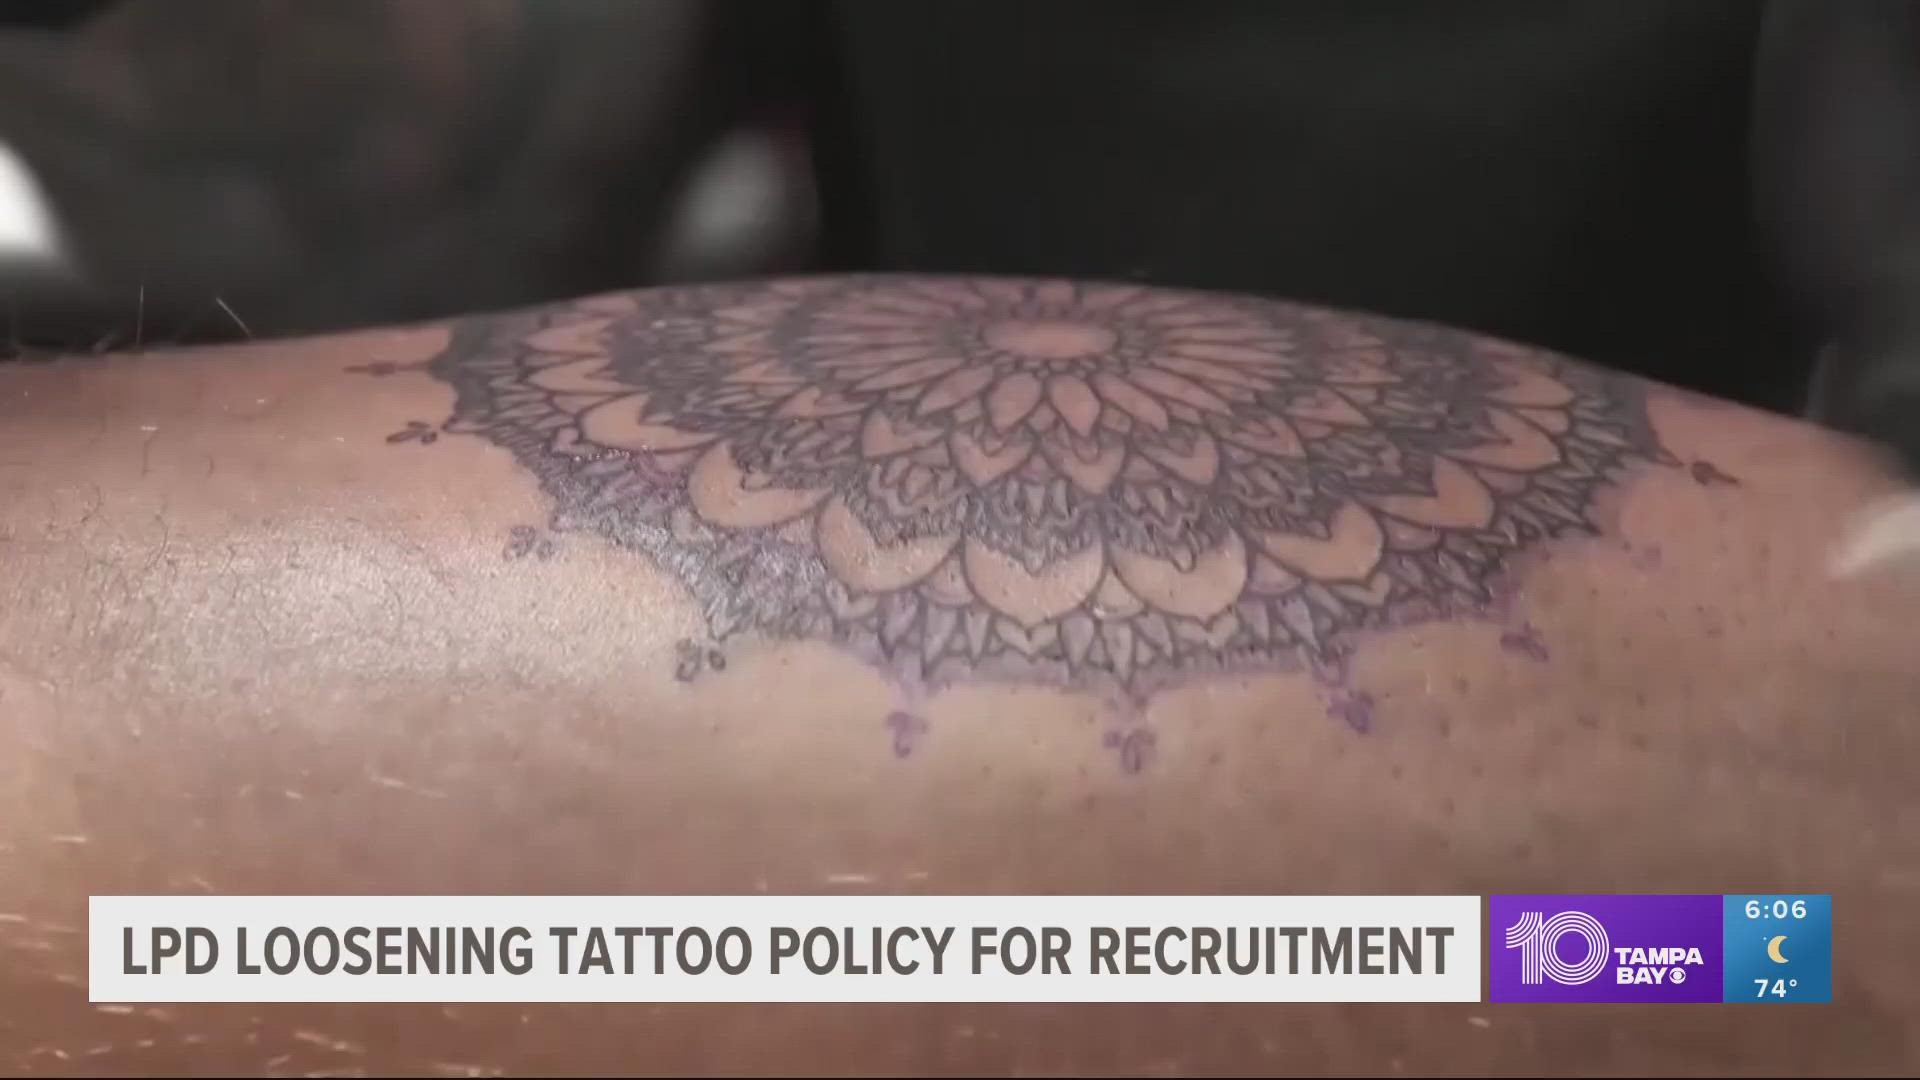 Does having a tattoo on a wrist create an issue to become a cabin crew in  airlines? - Quora